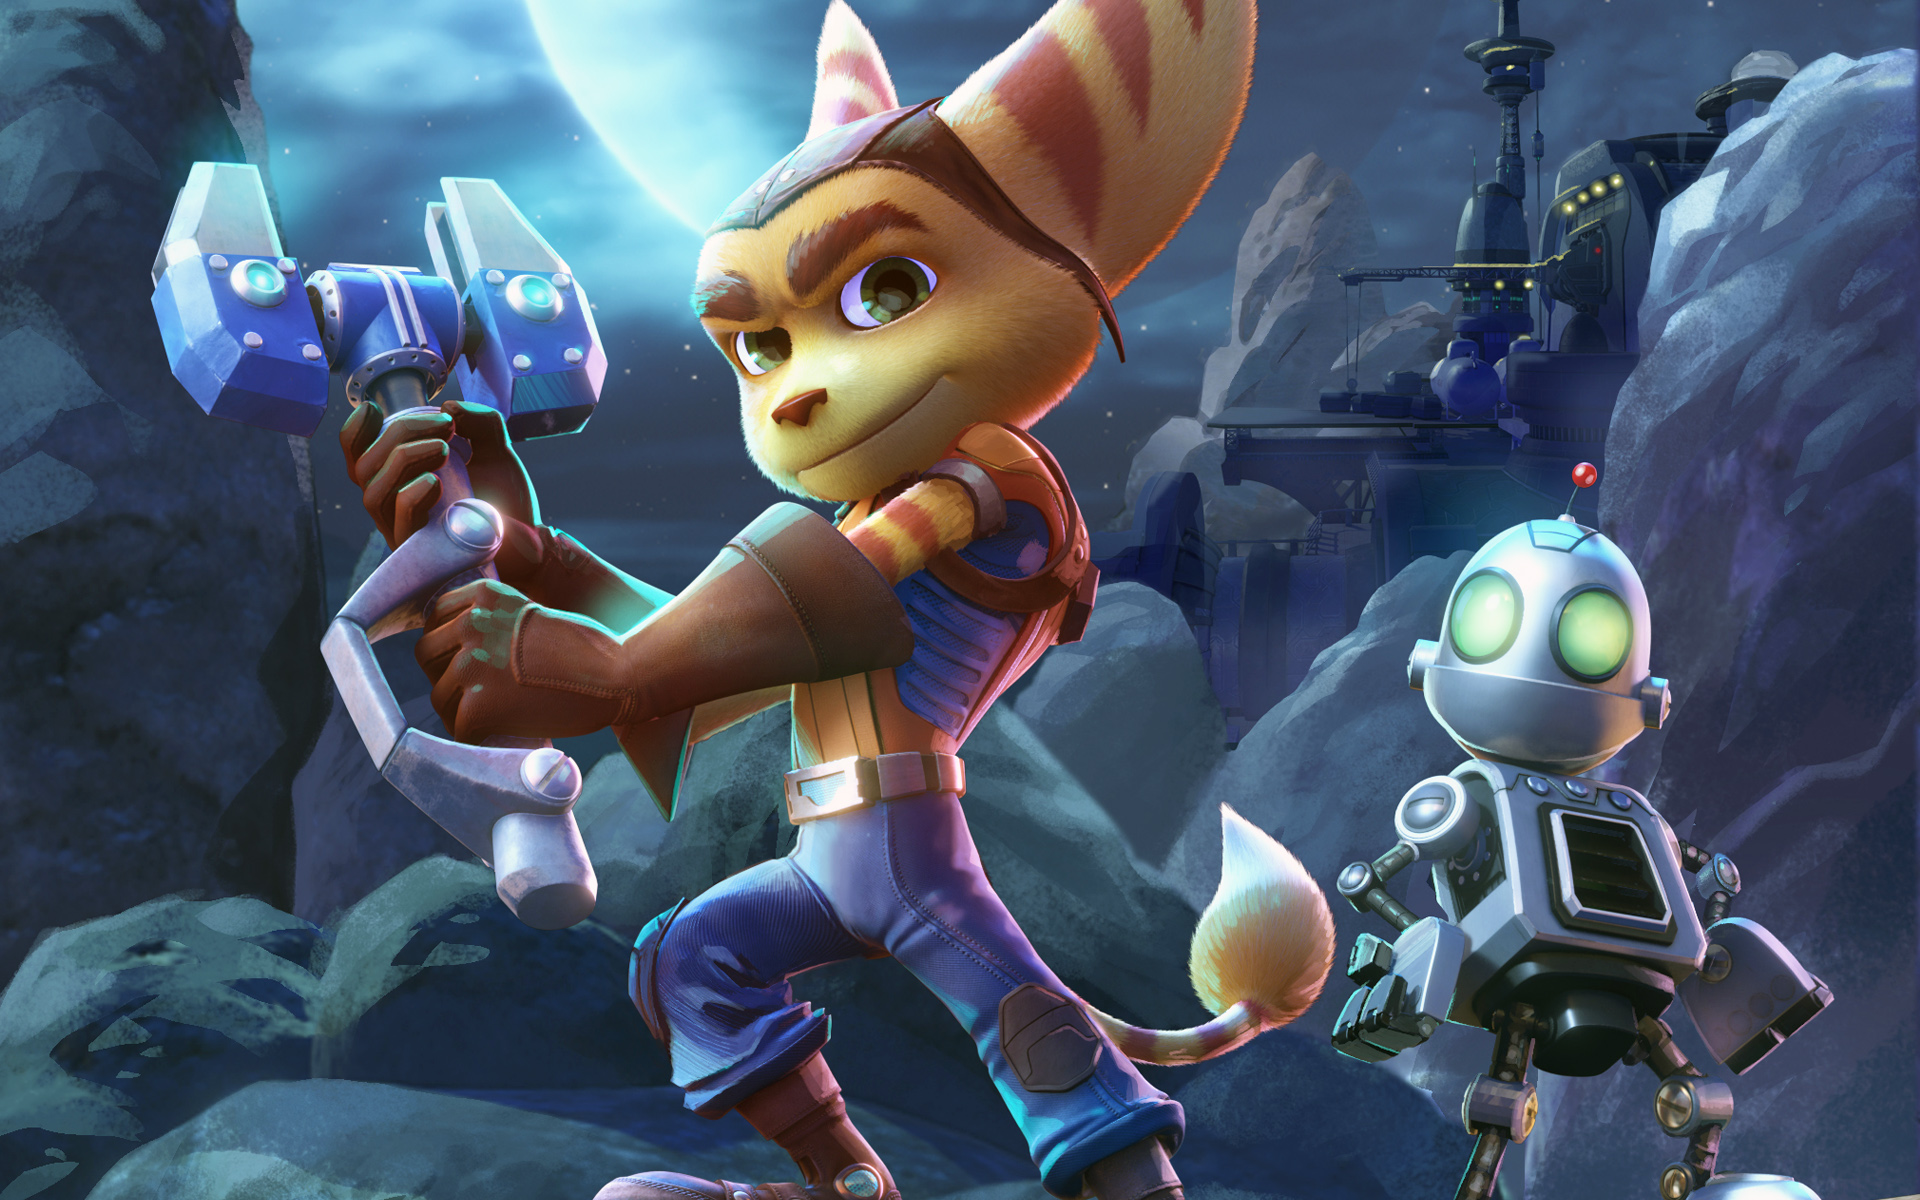 Movie Ratchet & Clank HD Wallpaper | Background Image